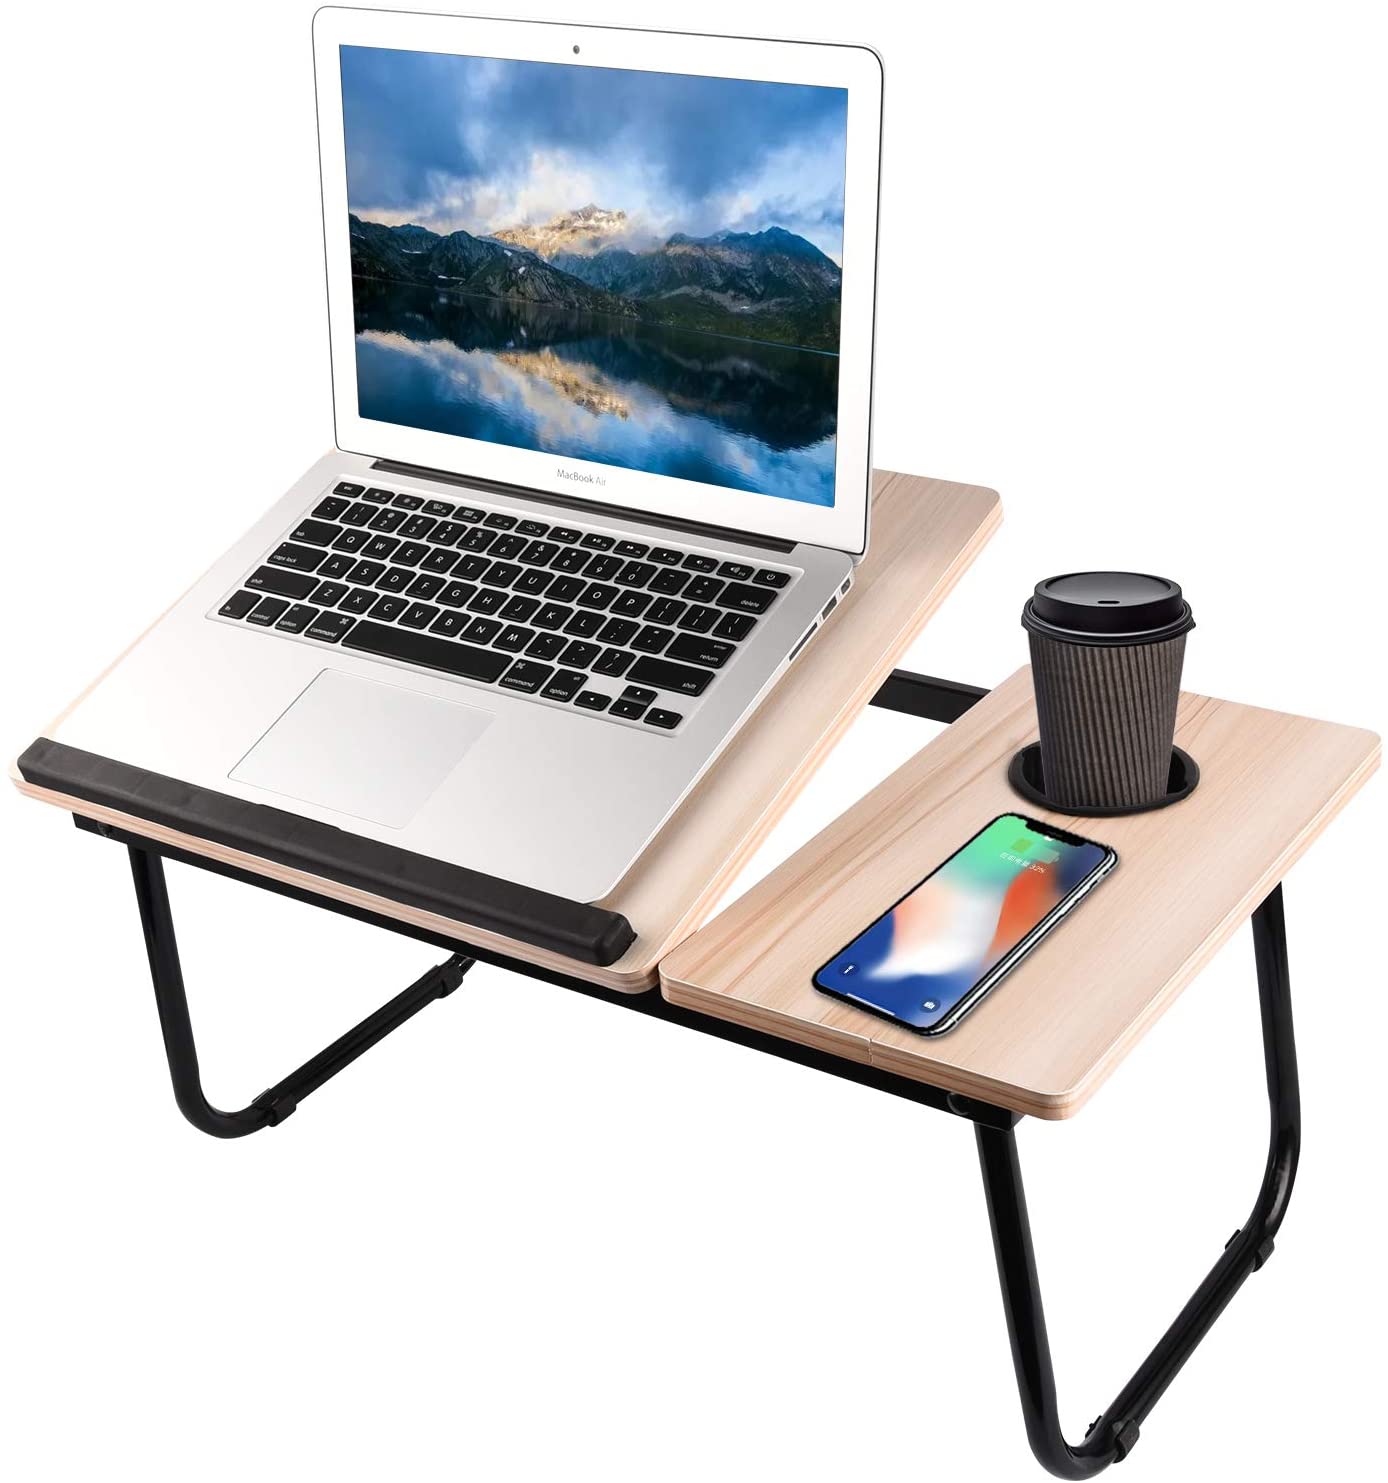 Portable Laptop Table or laptop stand